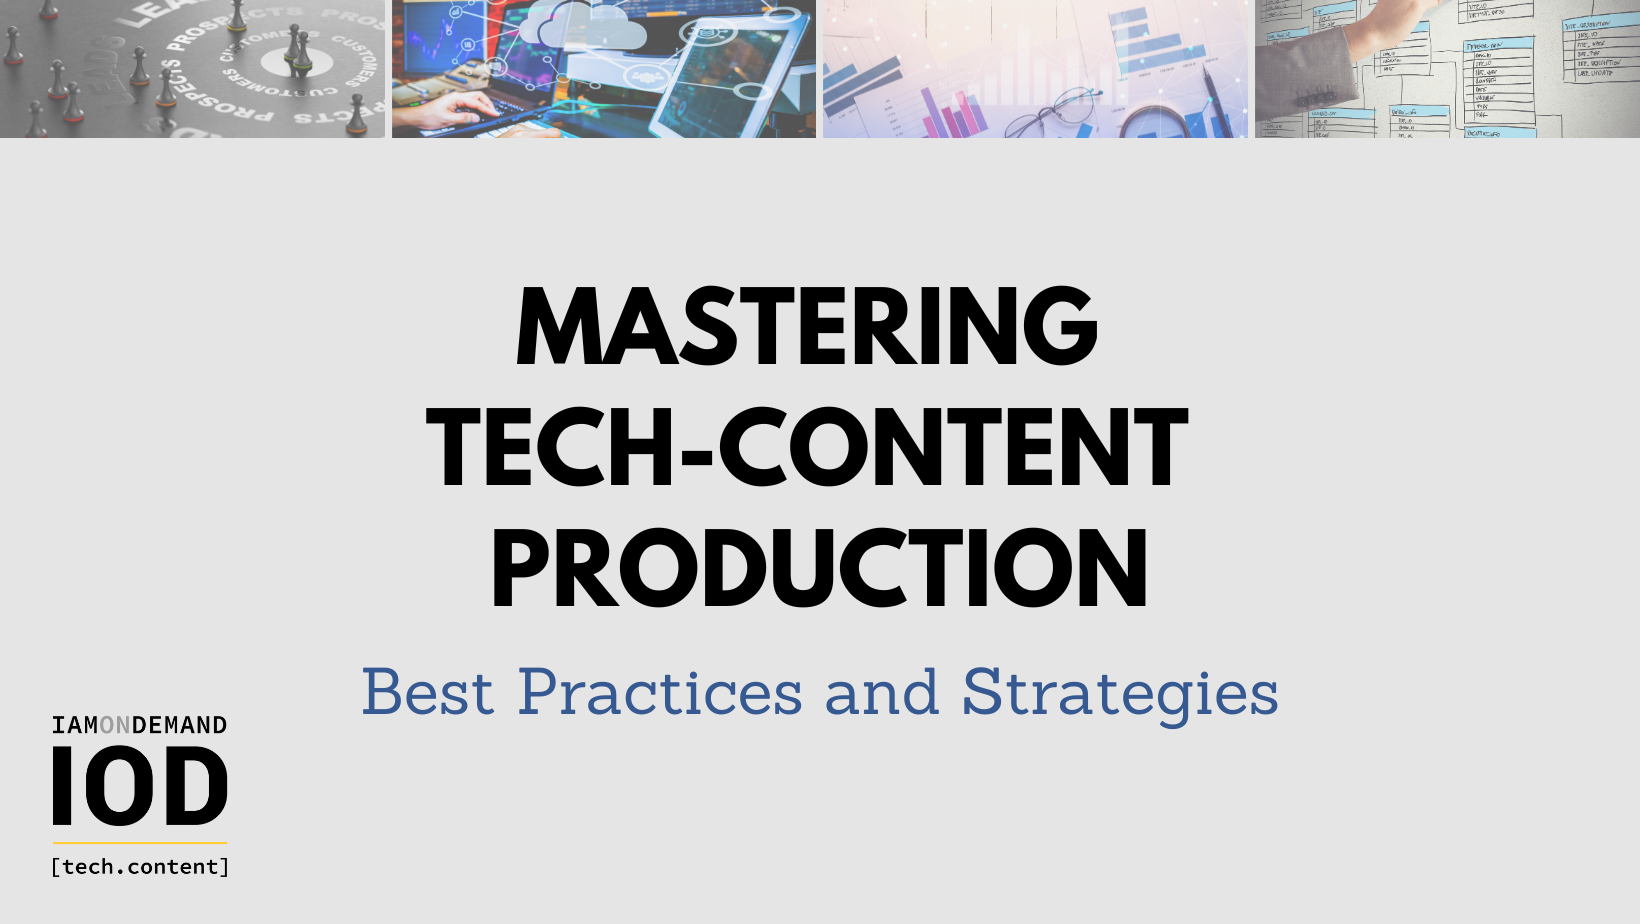 [INFOGRAPHIC] Mastering Tech Content Production: Best Practices and Strategies